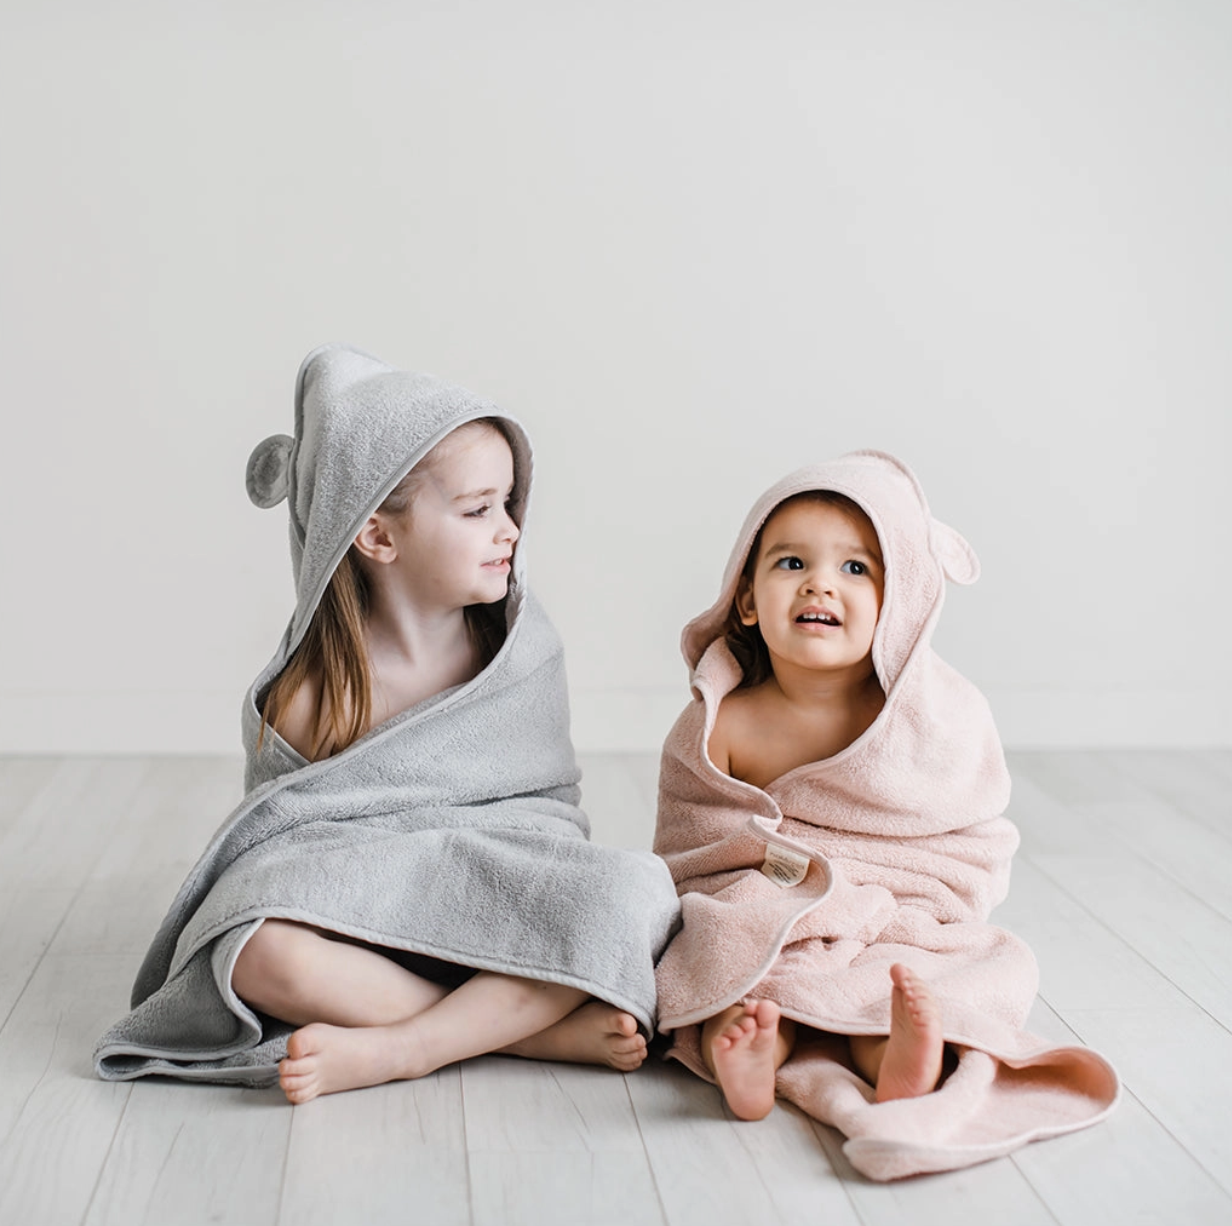 Load image into Gallery viewer, Organic Cotton Hooded Towel For Babies and Toddlers - Pink
